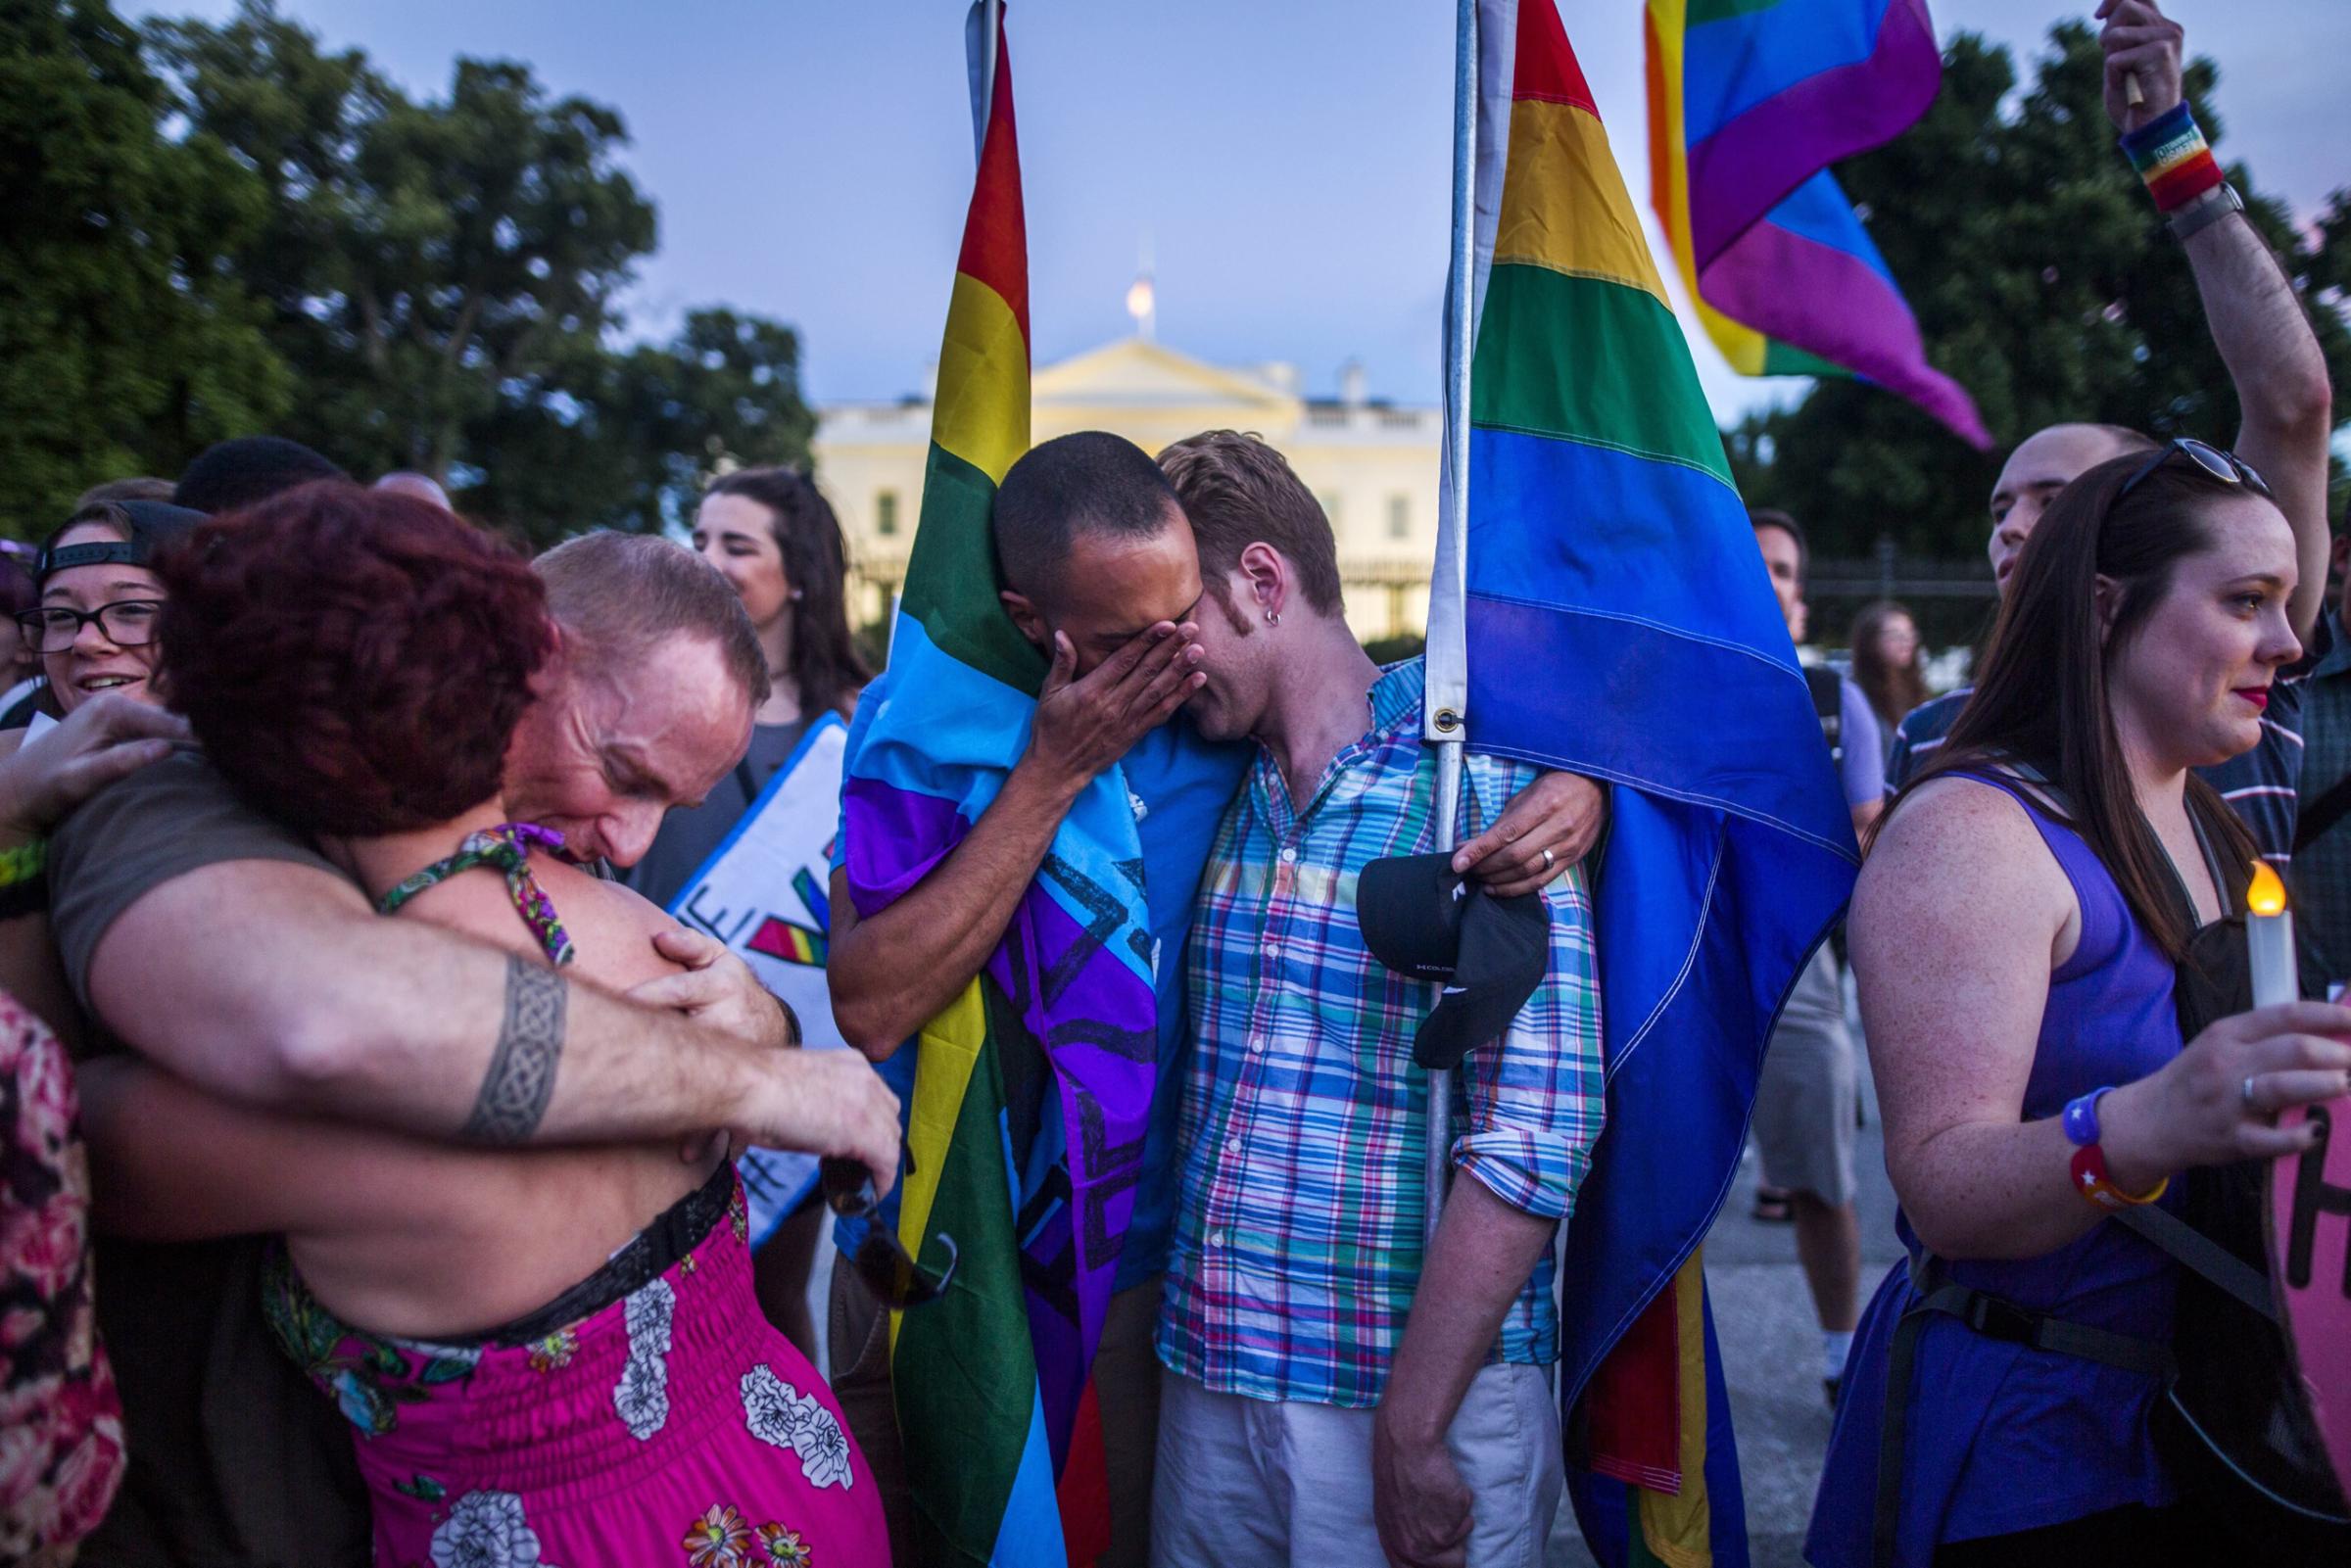 Members and supporters of the lesbian, gay, transgender, bisexual and queer (LGTBQ) community attend a candlelight vigil outside the White House in Washington, D.C., June 12 2016.